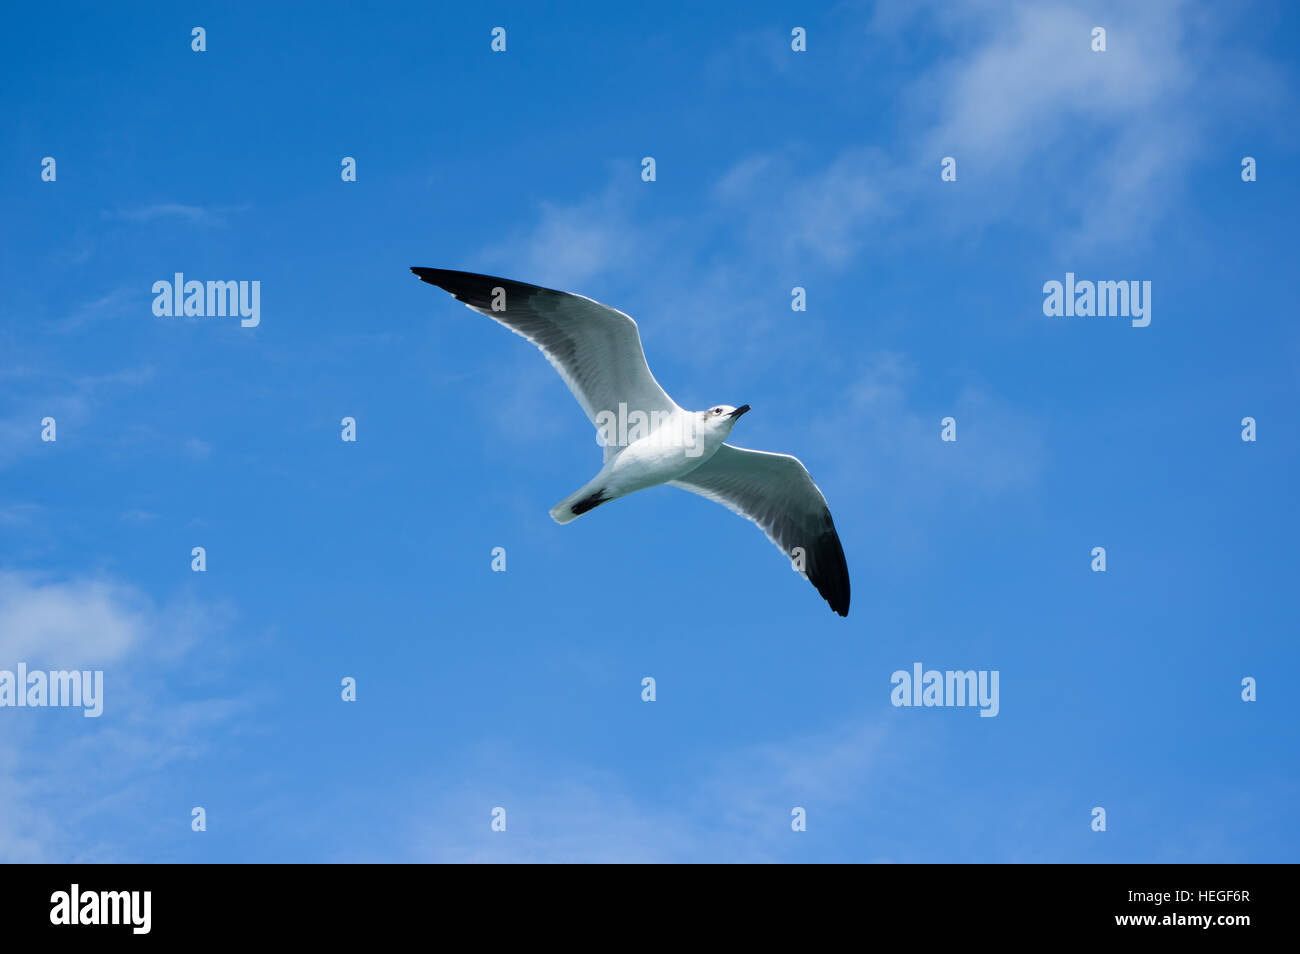 Gull soaring in a blue sky Stock Photo